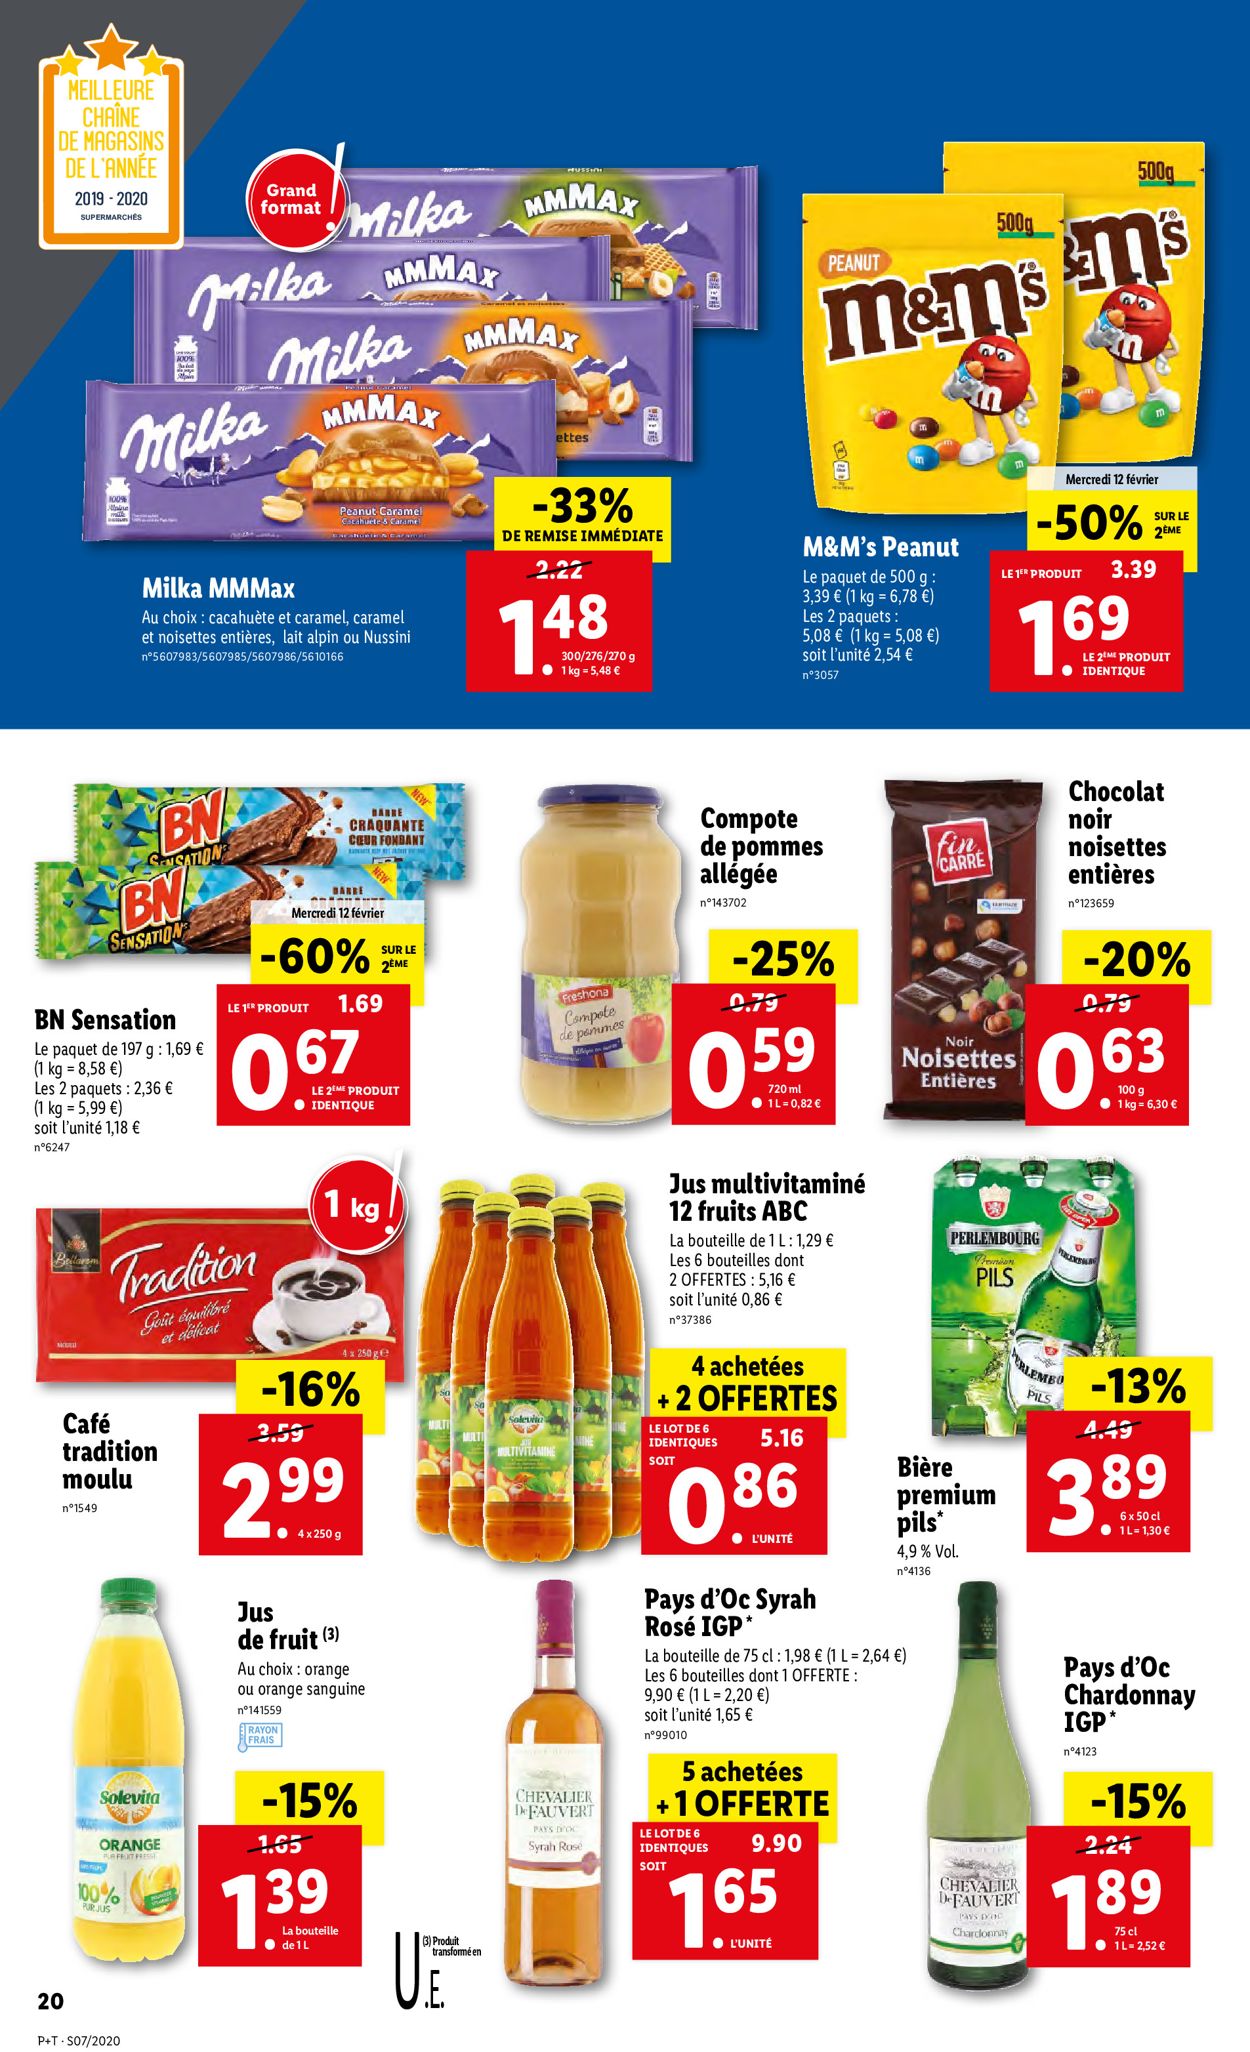 Lidl Catalogue - 12.02-18.02.2020 (Page 20)